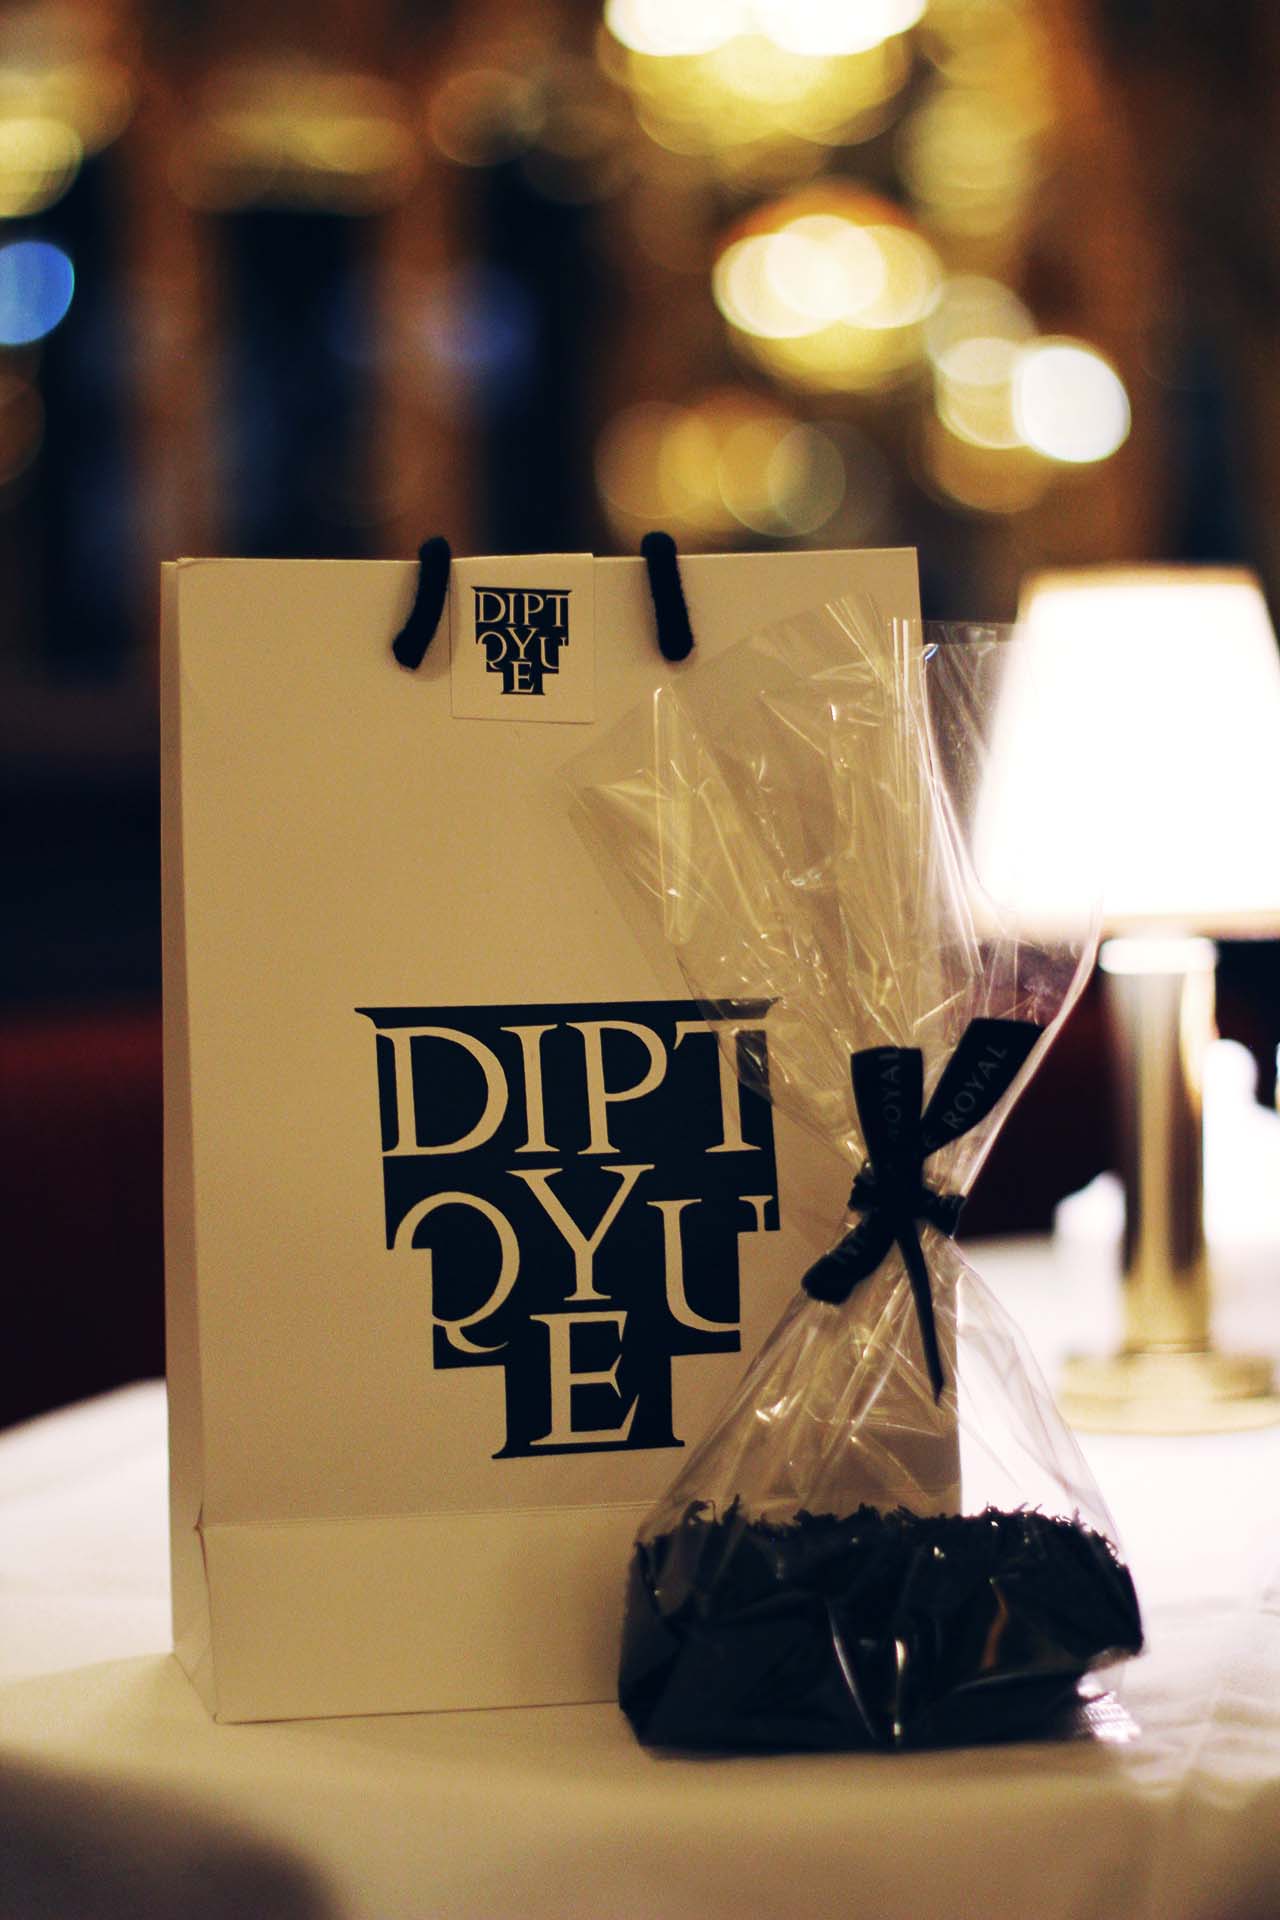 An Afternoon With Oscar: Diptyque Afternoon Tea at Hotel Cafe Royal